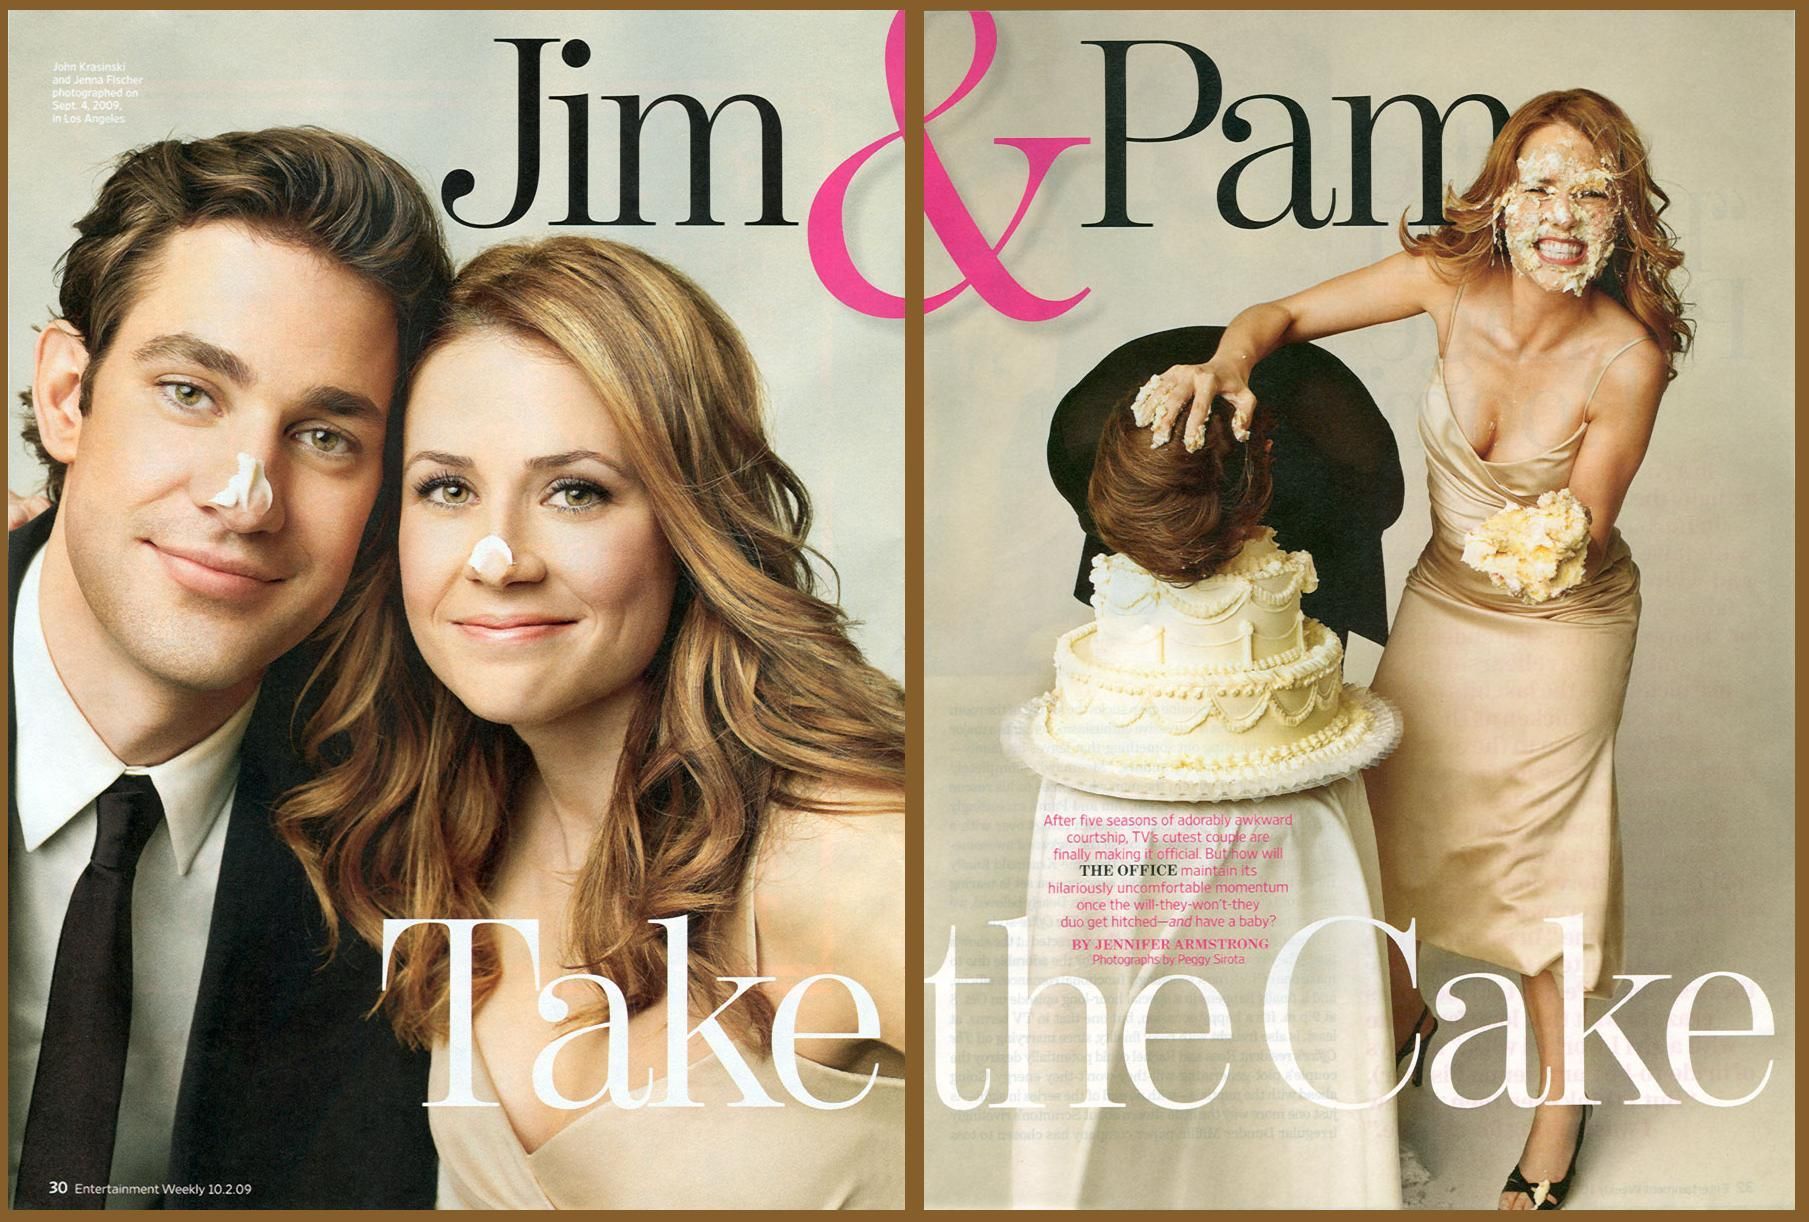 yep, that would be Jim and Pam. The office wedding, Jim and pam wedding, Jim pam